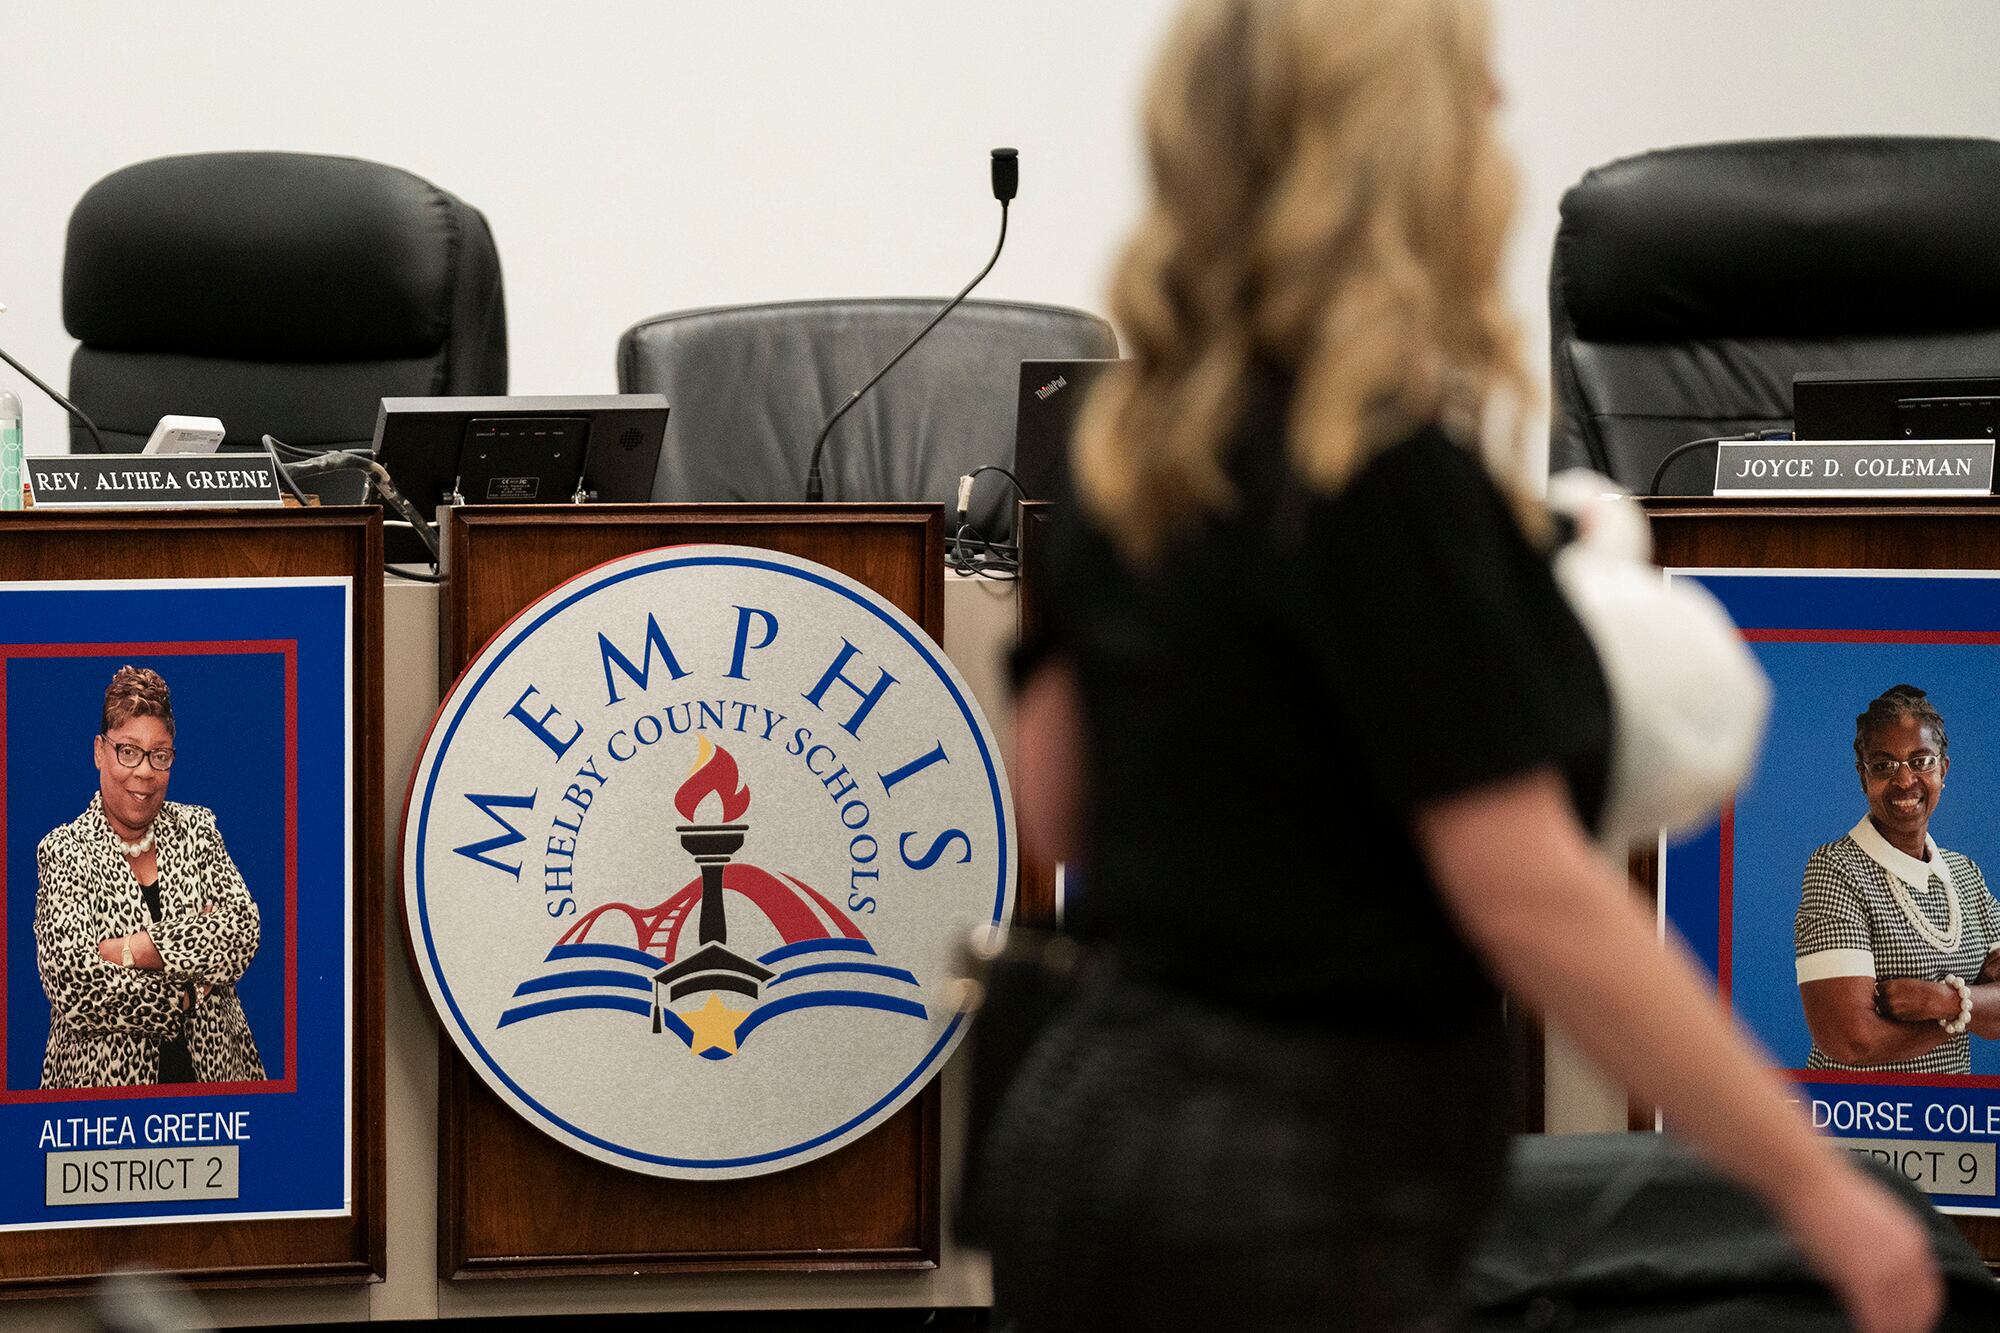 A woman wearing a black shirt walks in front of a desk with chairs in the background. There is a large logo on the side of the table that reads, "Memphis Shelby County Schools."